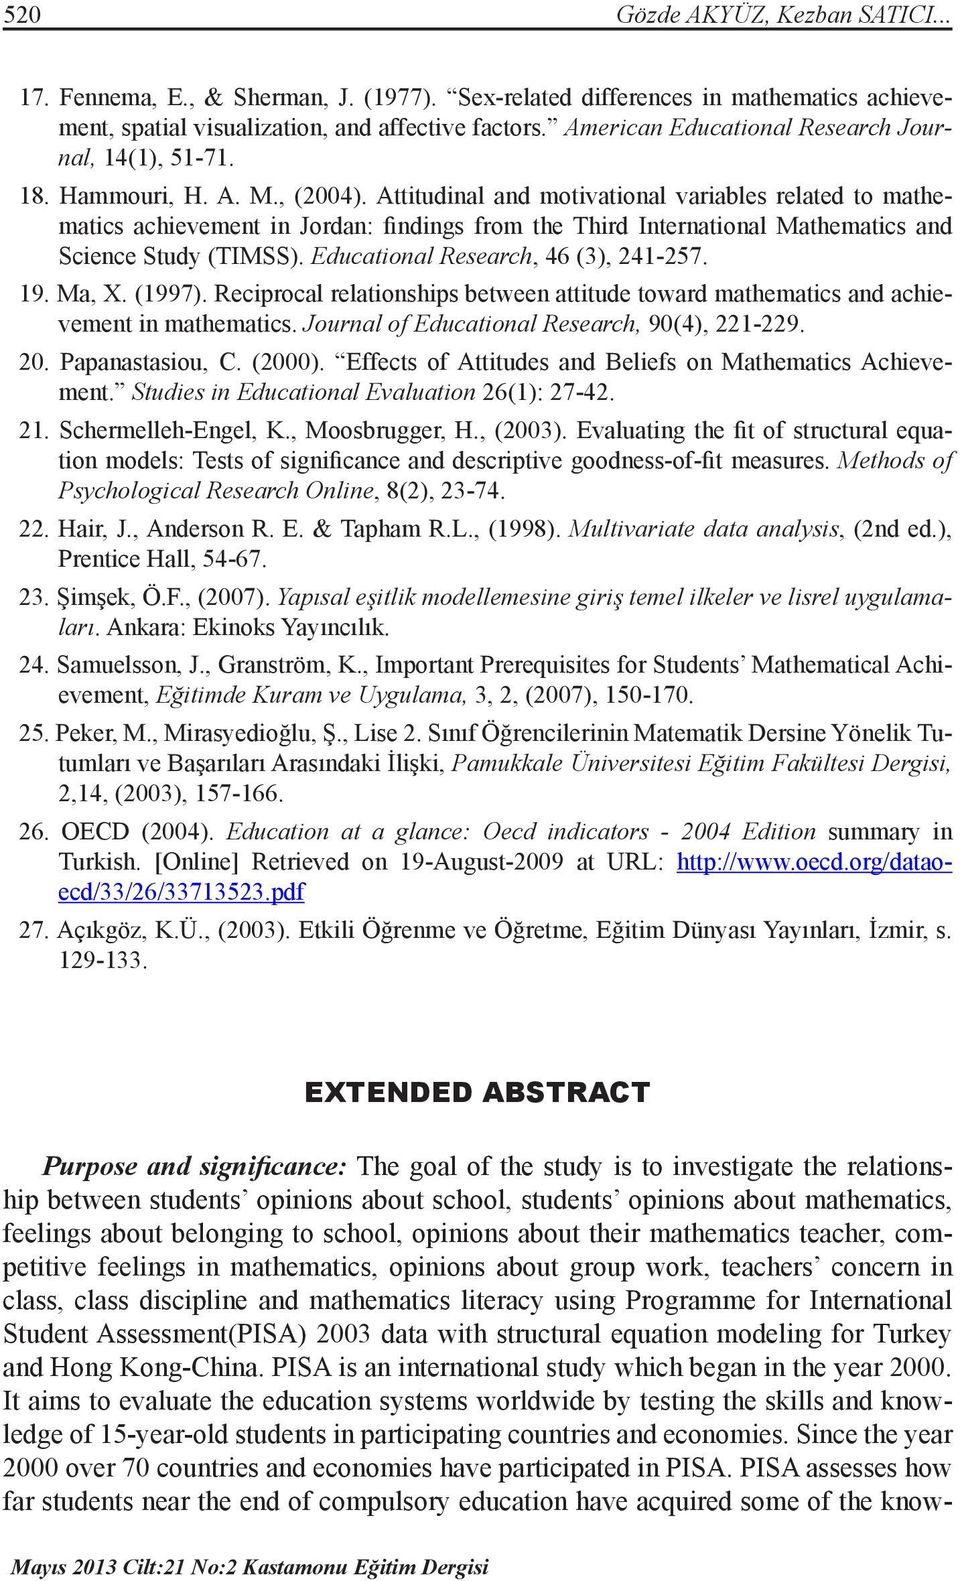 Attitudinal and motivational variables related to mathematics achievement in Jordan: findings from the Third International Mathematics and Science Study (TIMSS). Educational Research, 46 (3), 241-257.